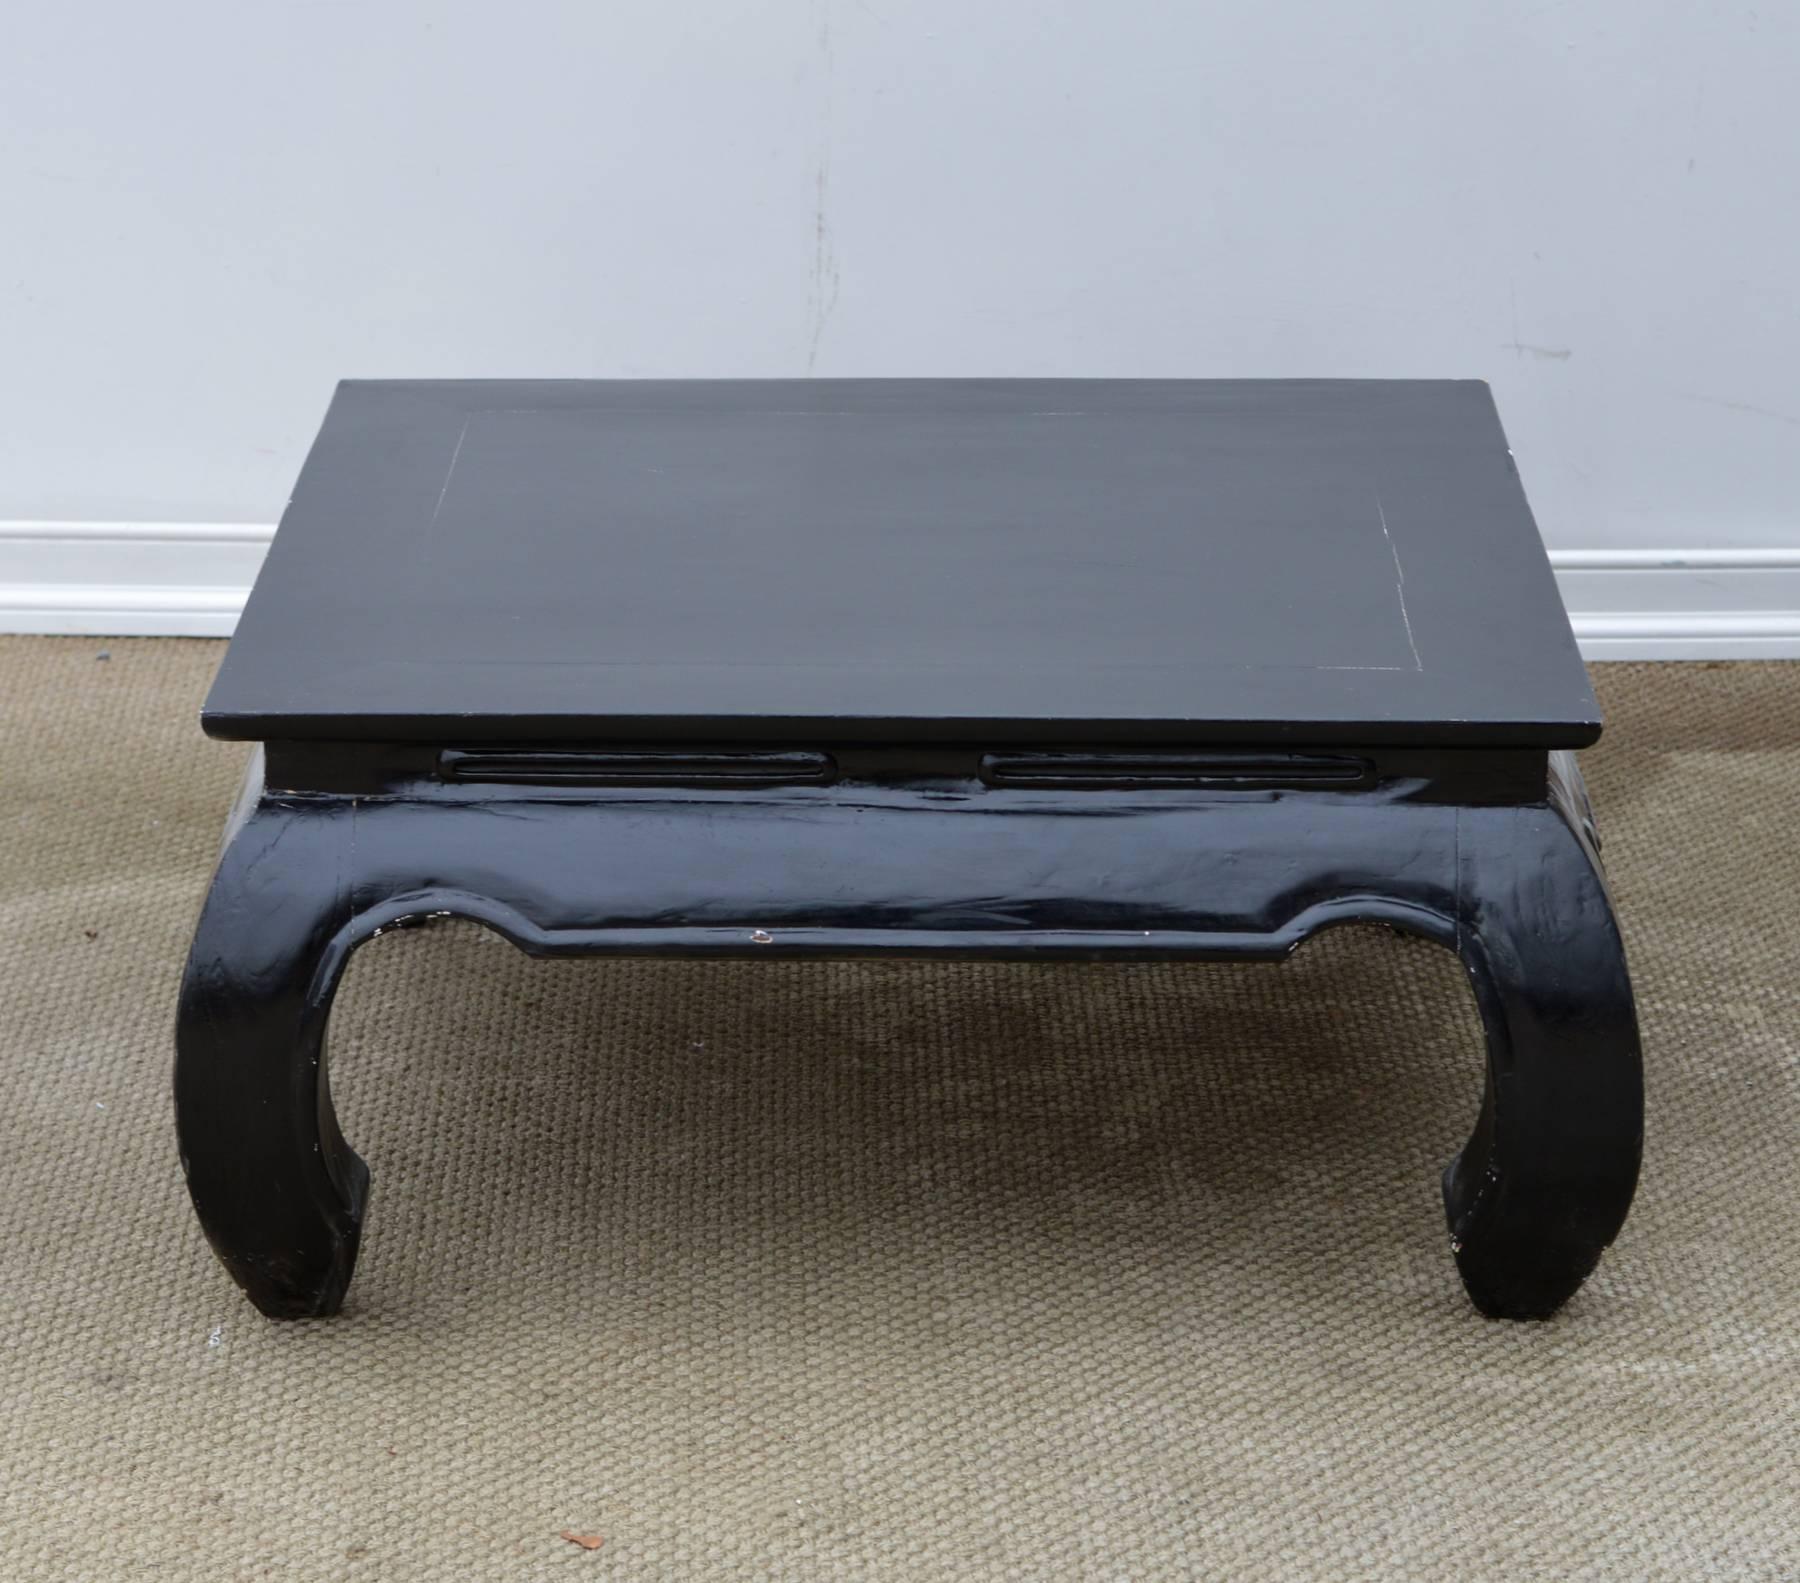 Chinese Square Ming Style Coffee Table with Rustic Ebonized Finish